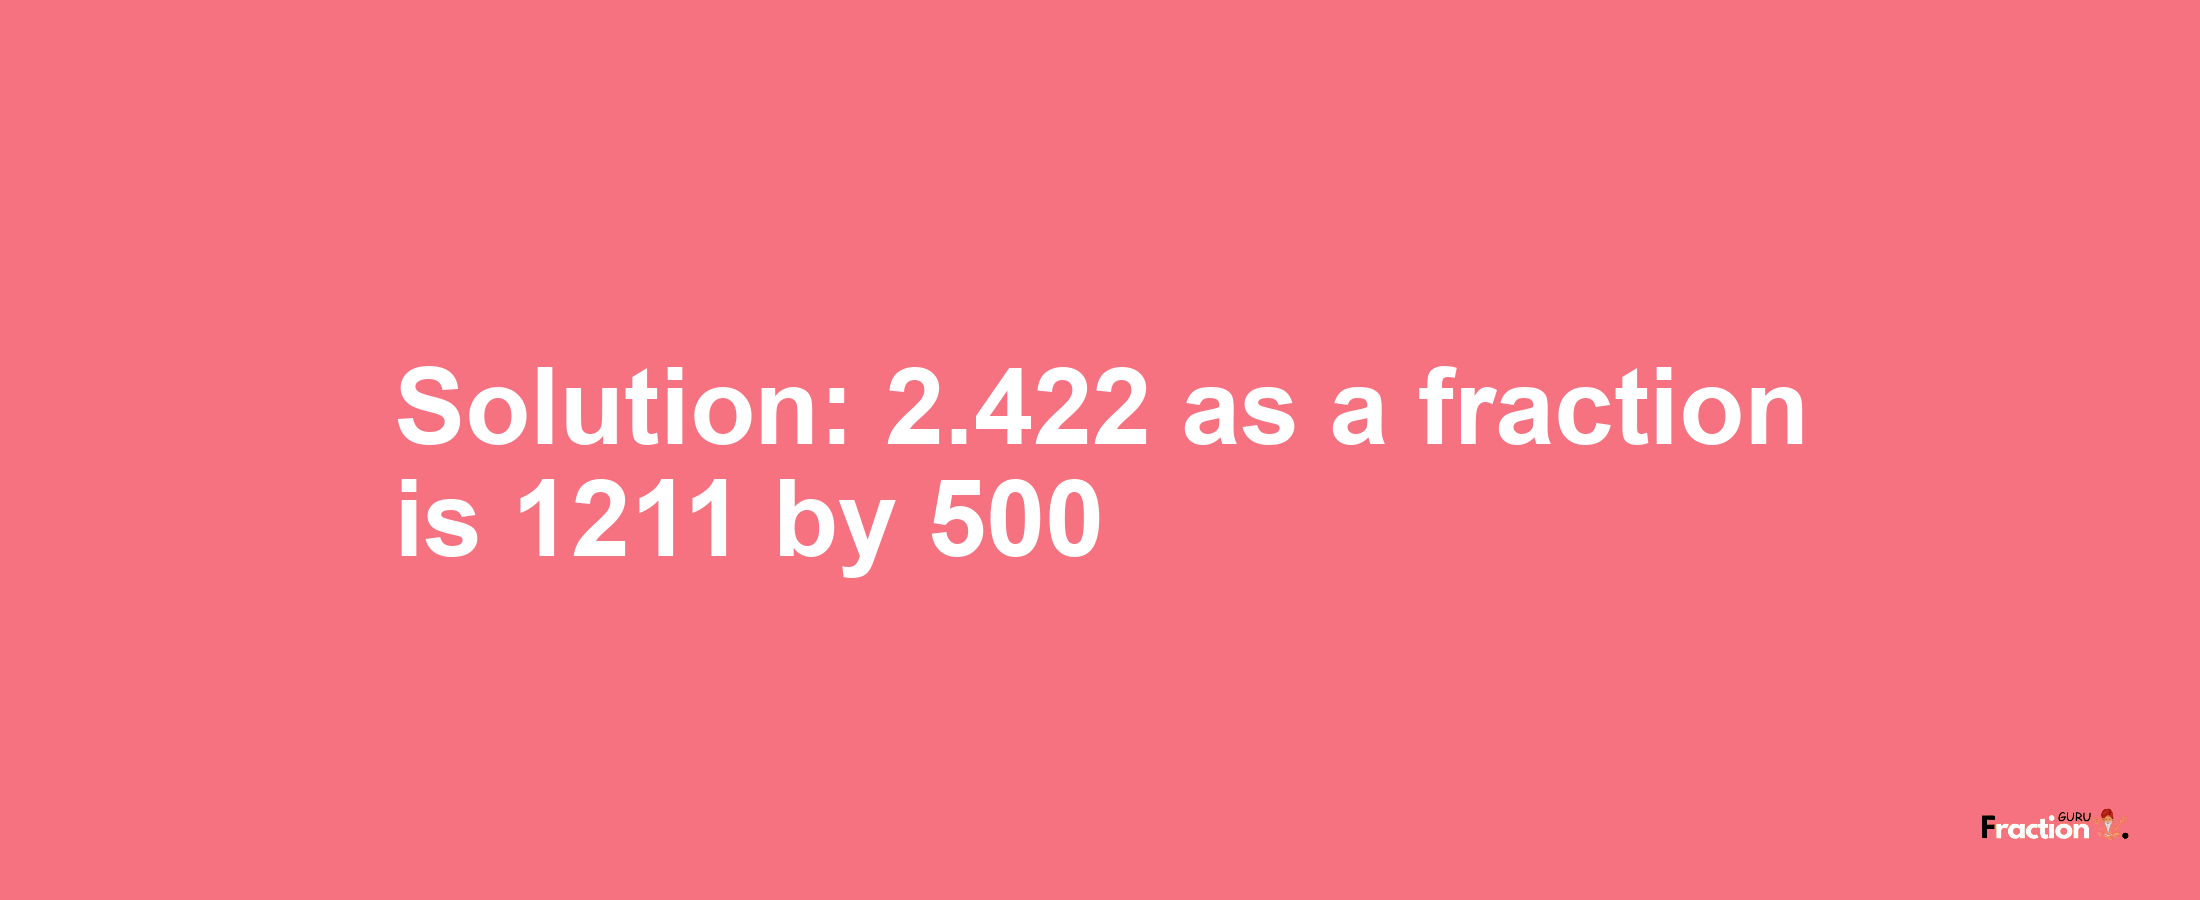 Solution:2.422 as a fraction is 1211/500